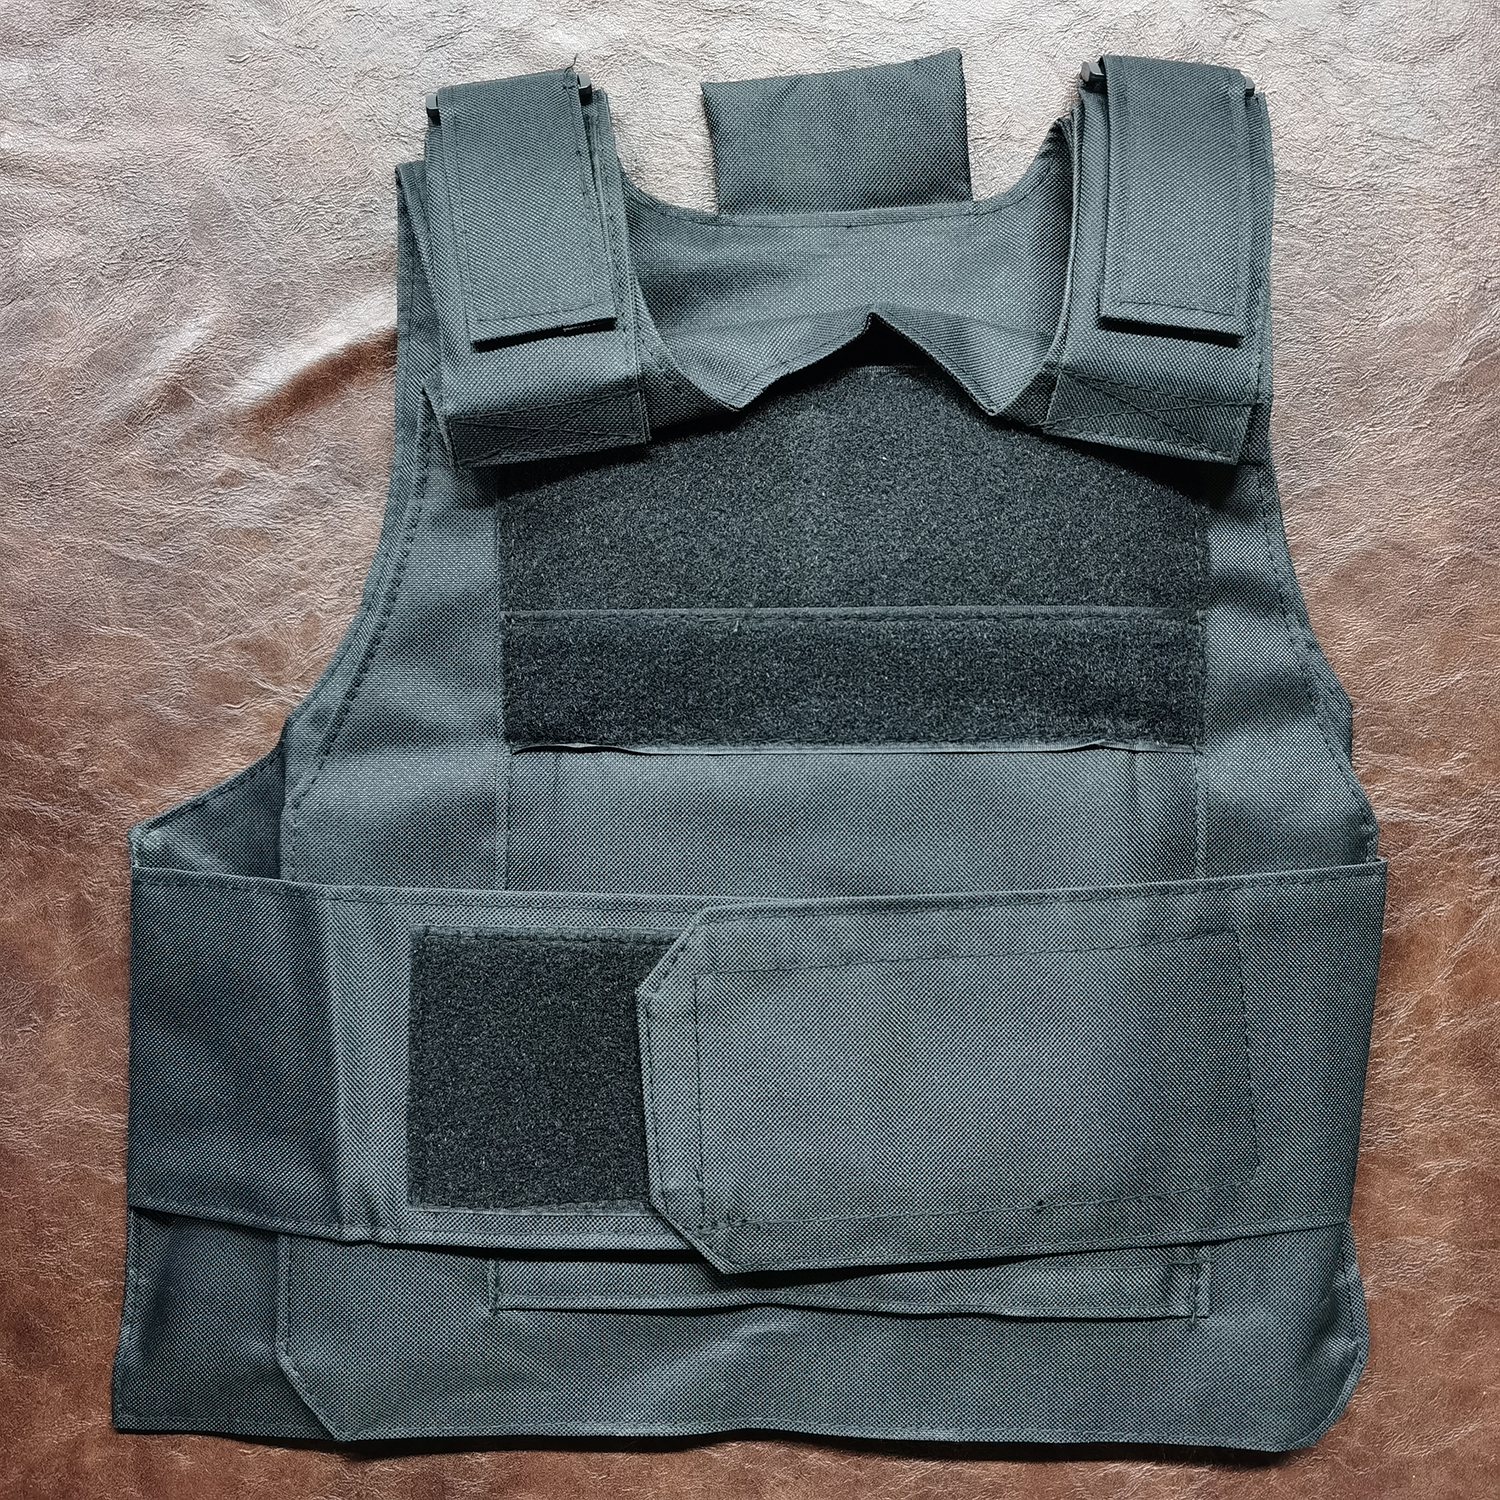 High Quality Unisex Adjustable Breathable Bulletproof Vests Plate Tactical Anti-Cut Clothing Outdoor Self-defense Supplies